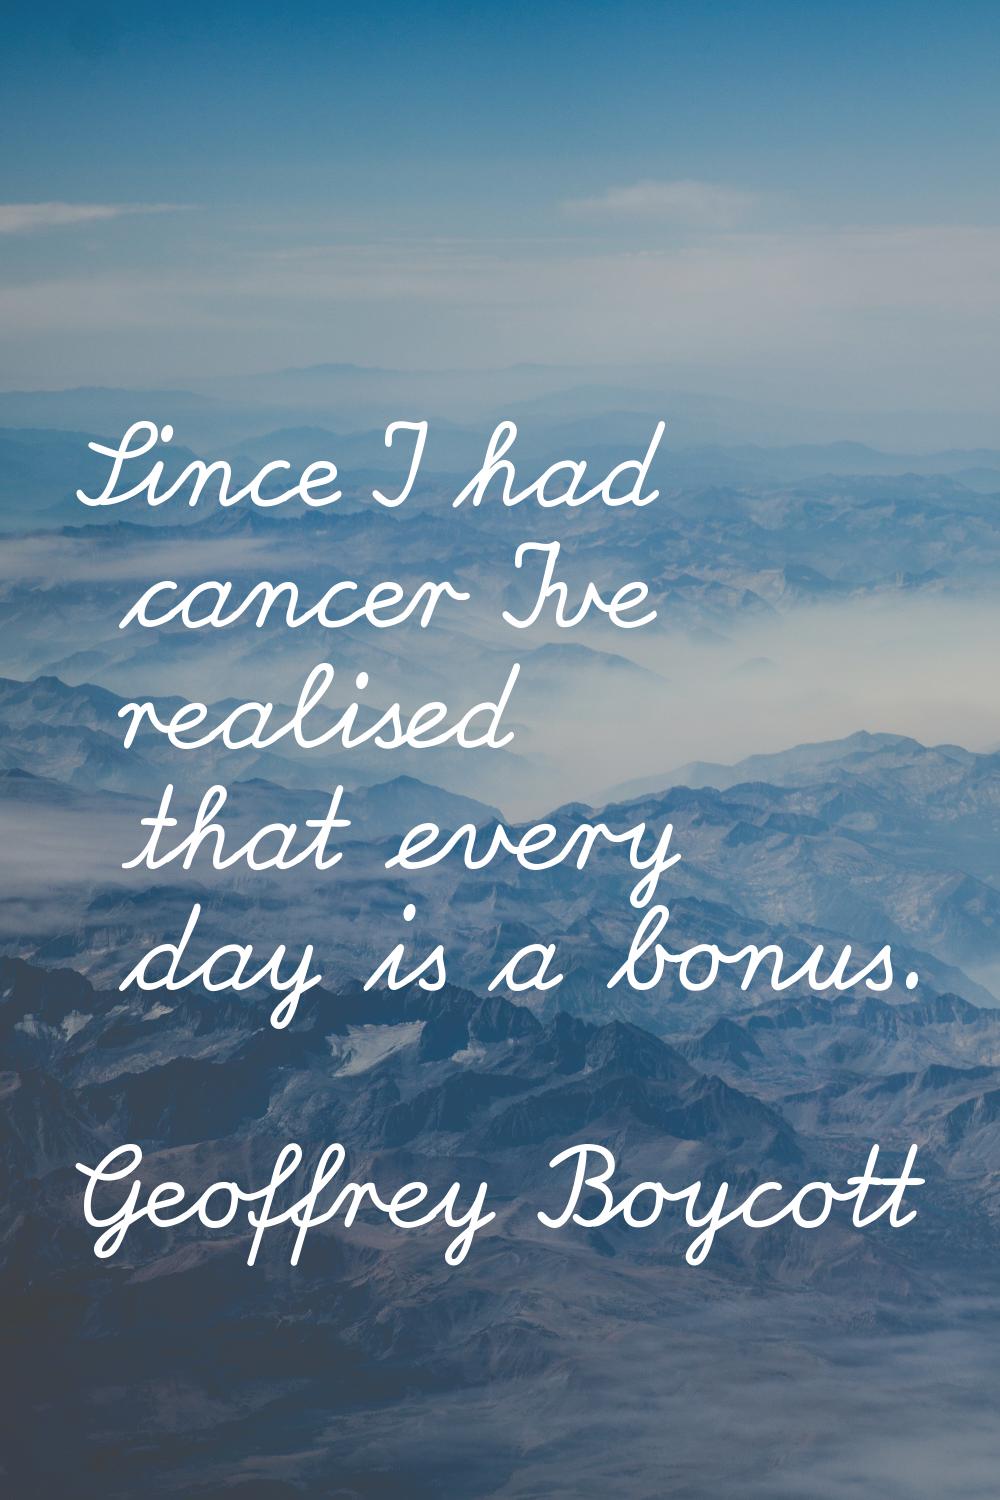 Since I had cancer I've realised that every day is a bonus.